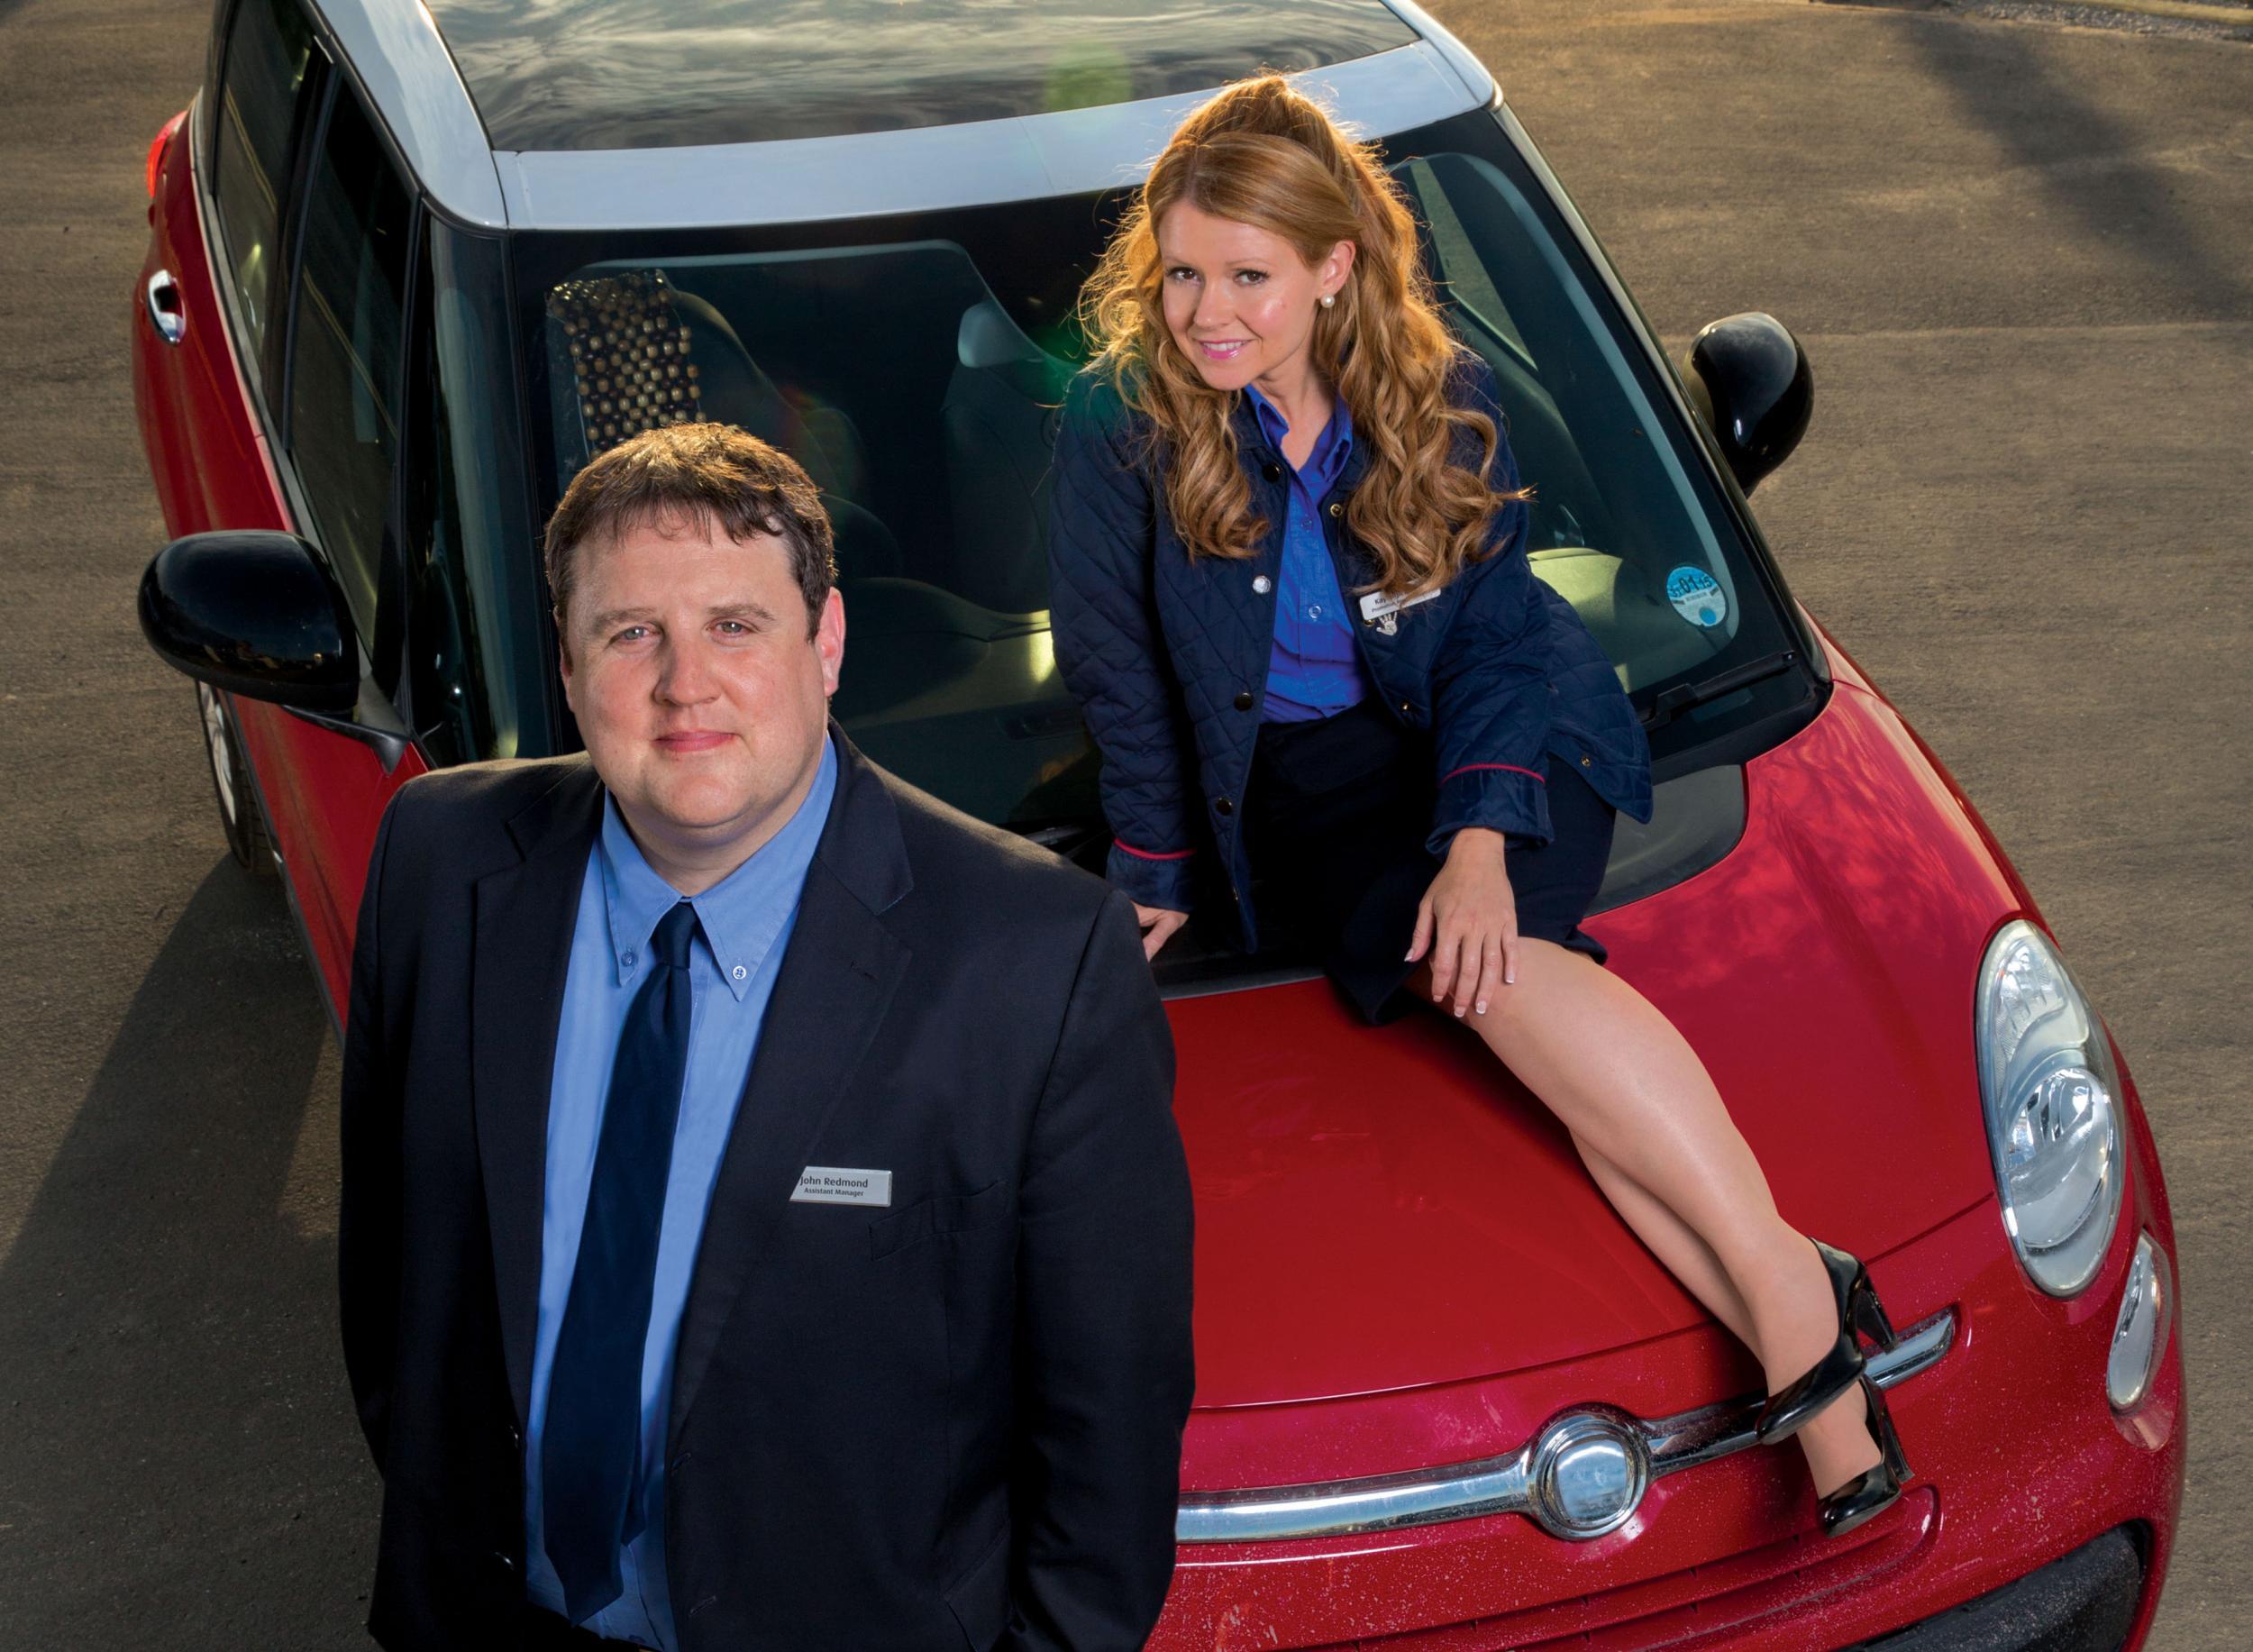 Peter Kay and Sian Gibson are back in this sweet comedy